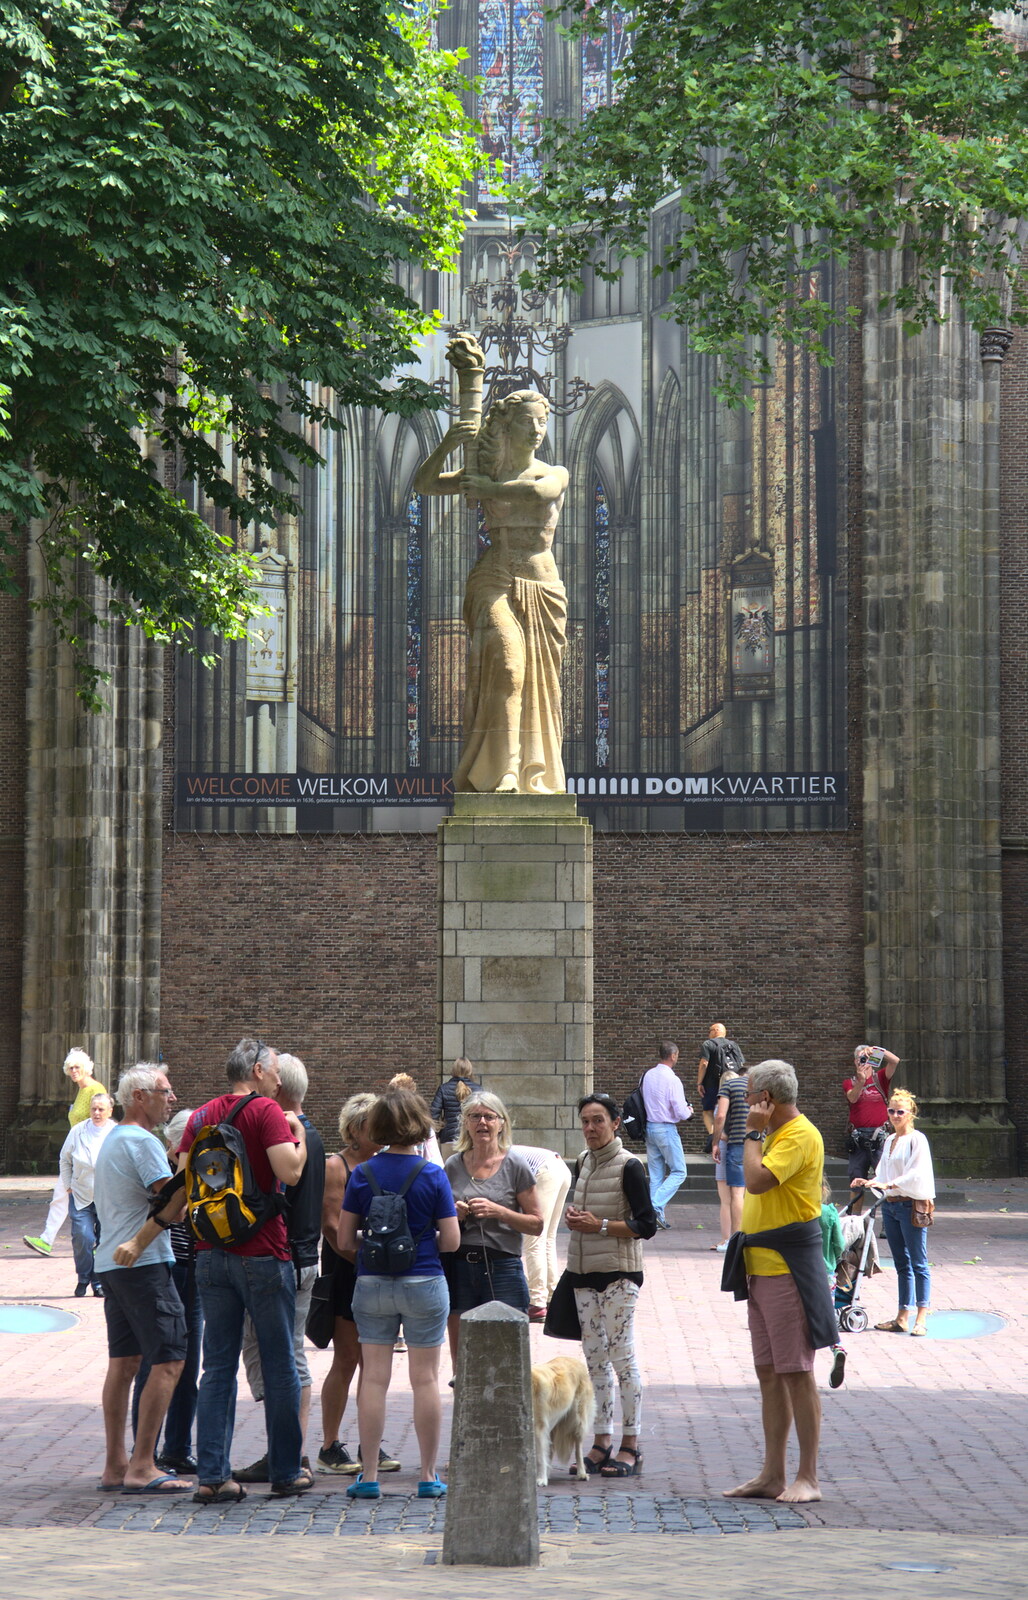 The Cathedral of Saint Martin, on Domplein square from A Postcard from Utrecht, Nederlands - 10th June 2018